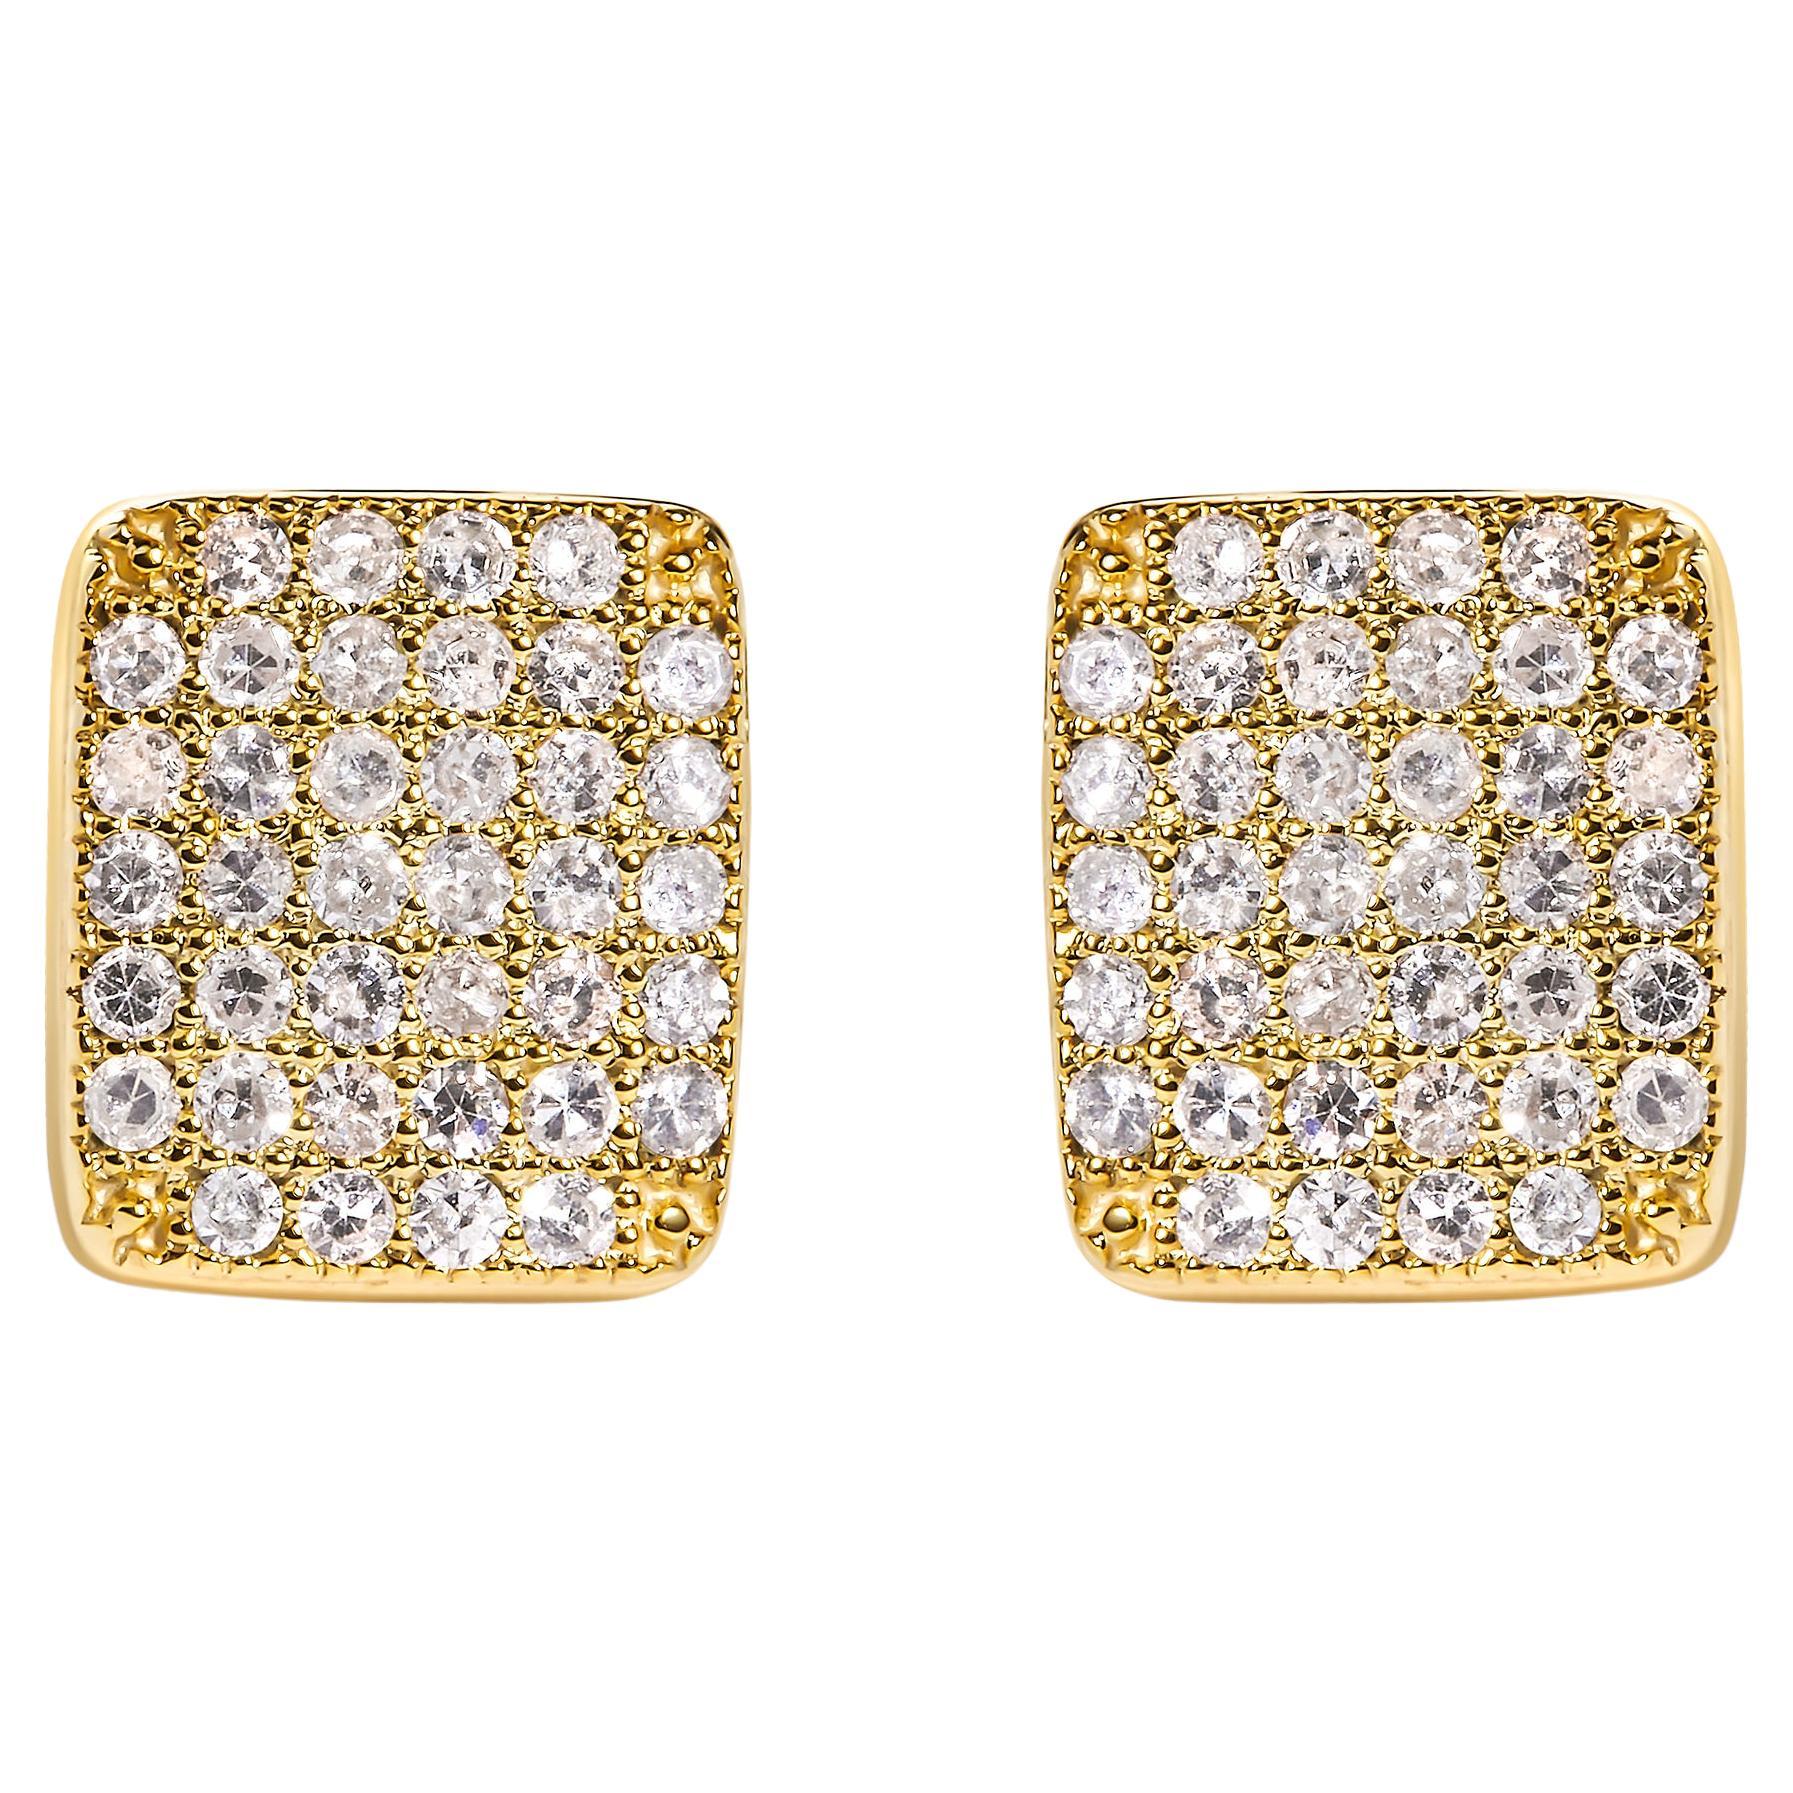 14K Yellow Gold 1/2 Carat Diamond Square Shaped Composite Cluster Stud Earrings 